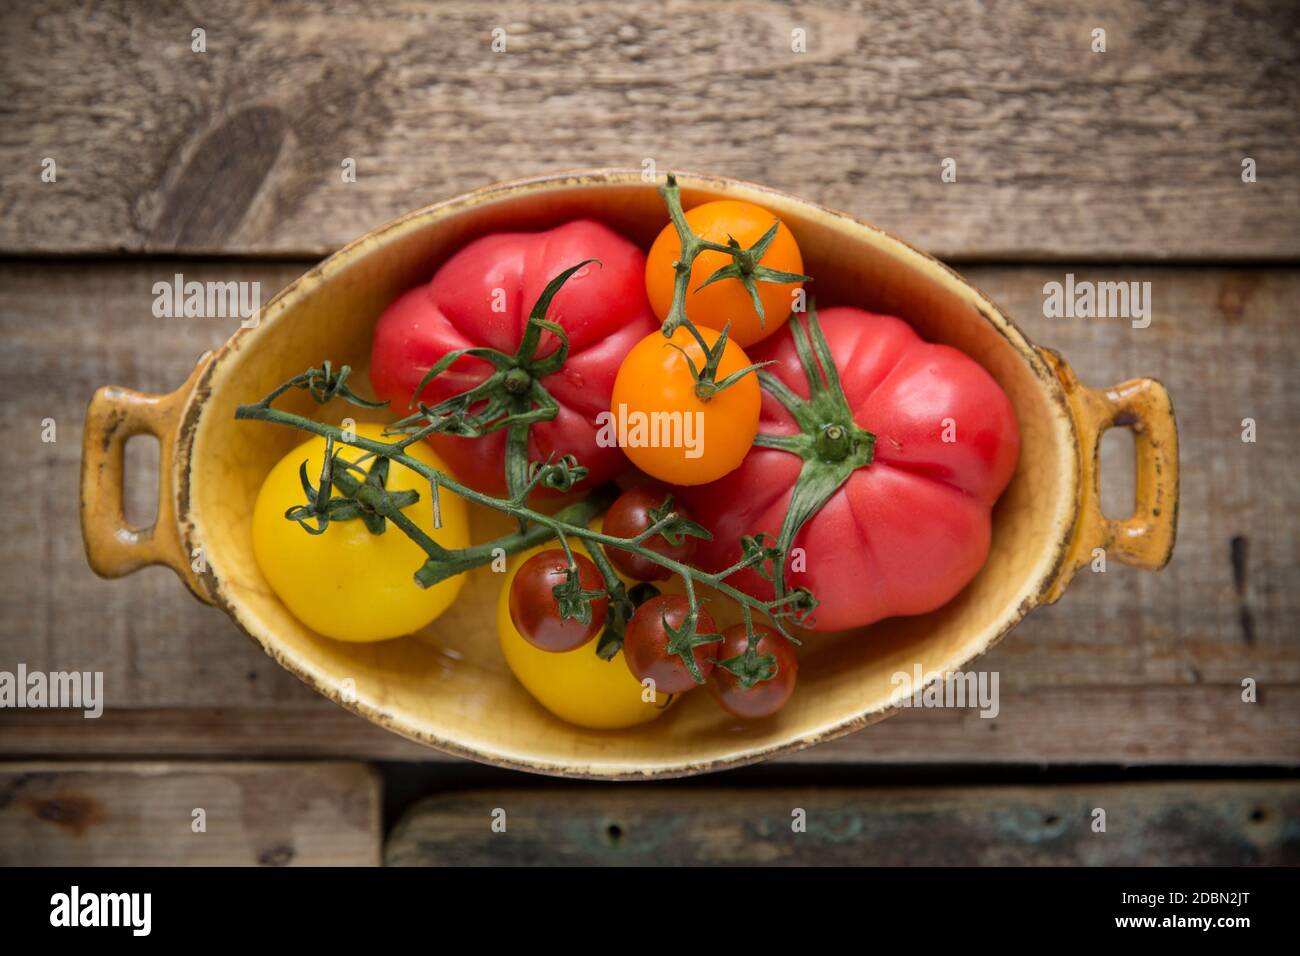 A selection of whole heirloom tomatoes displayed on a wooden background. England UK GB Stock Photo